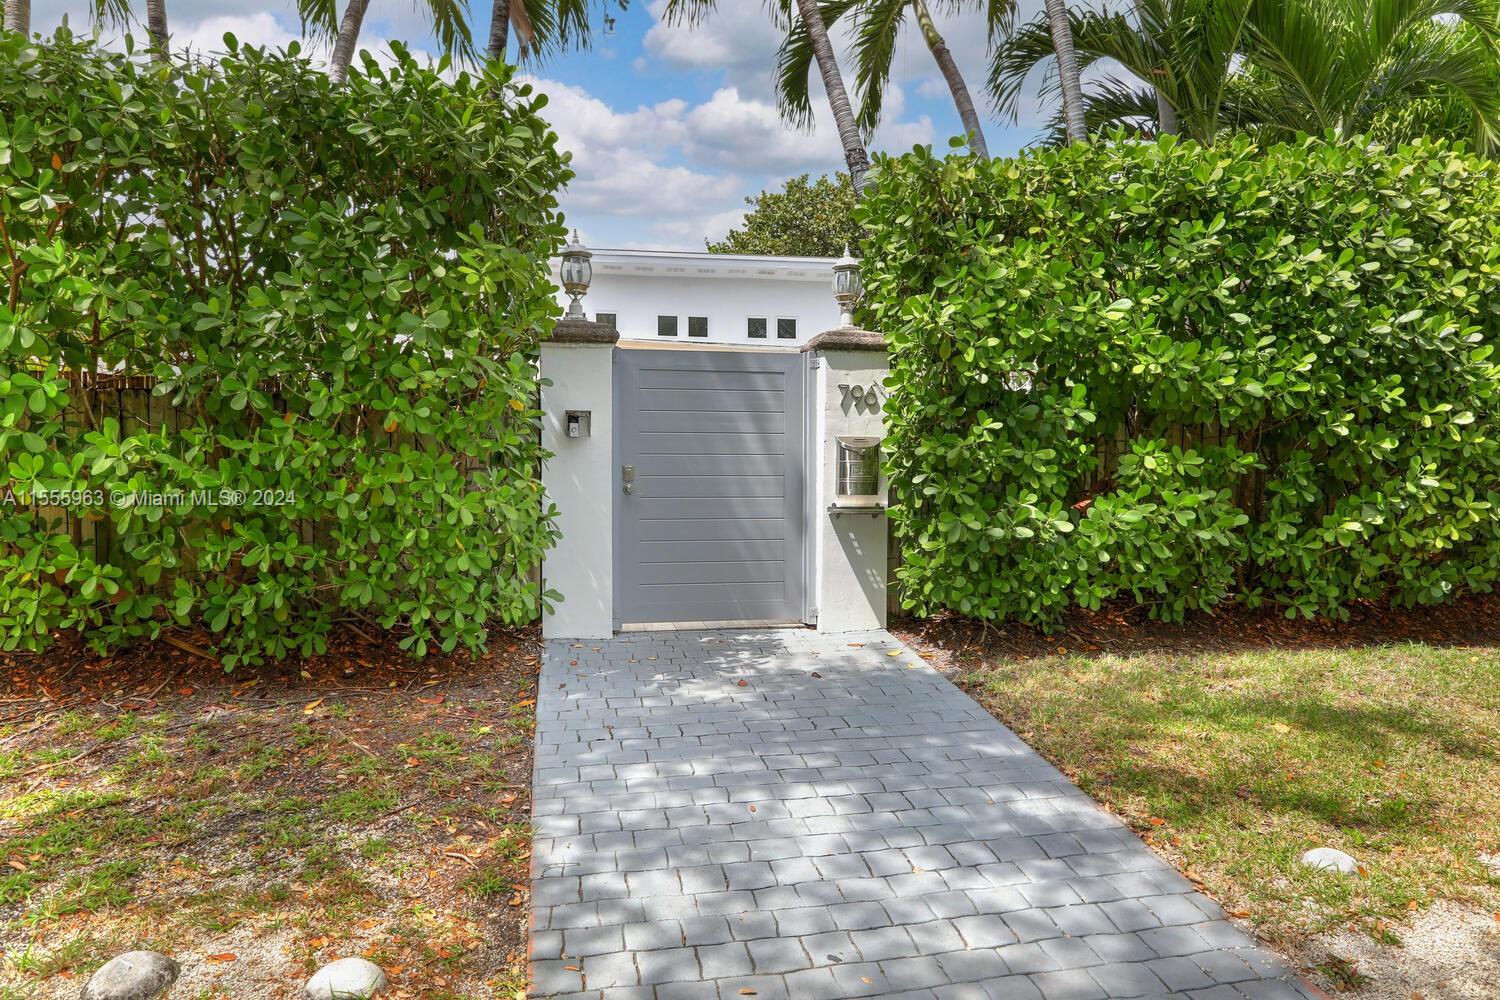 Desirable corner property in Key Biscayne.  (West Mashta and Glenridge Rd)  4 Bedrooms and 3.5 bathrooms plus office and storage room.  Separate cabana and salt water system pool.  Unique and remodeled beautifully.  Impact windows and doors, electric curtains, filtered water house system, yard sprinklers, sound system, vivint alarm system.  Easy to show.  Please 24 hour notification.